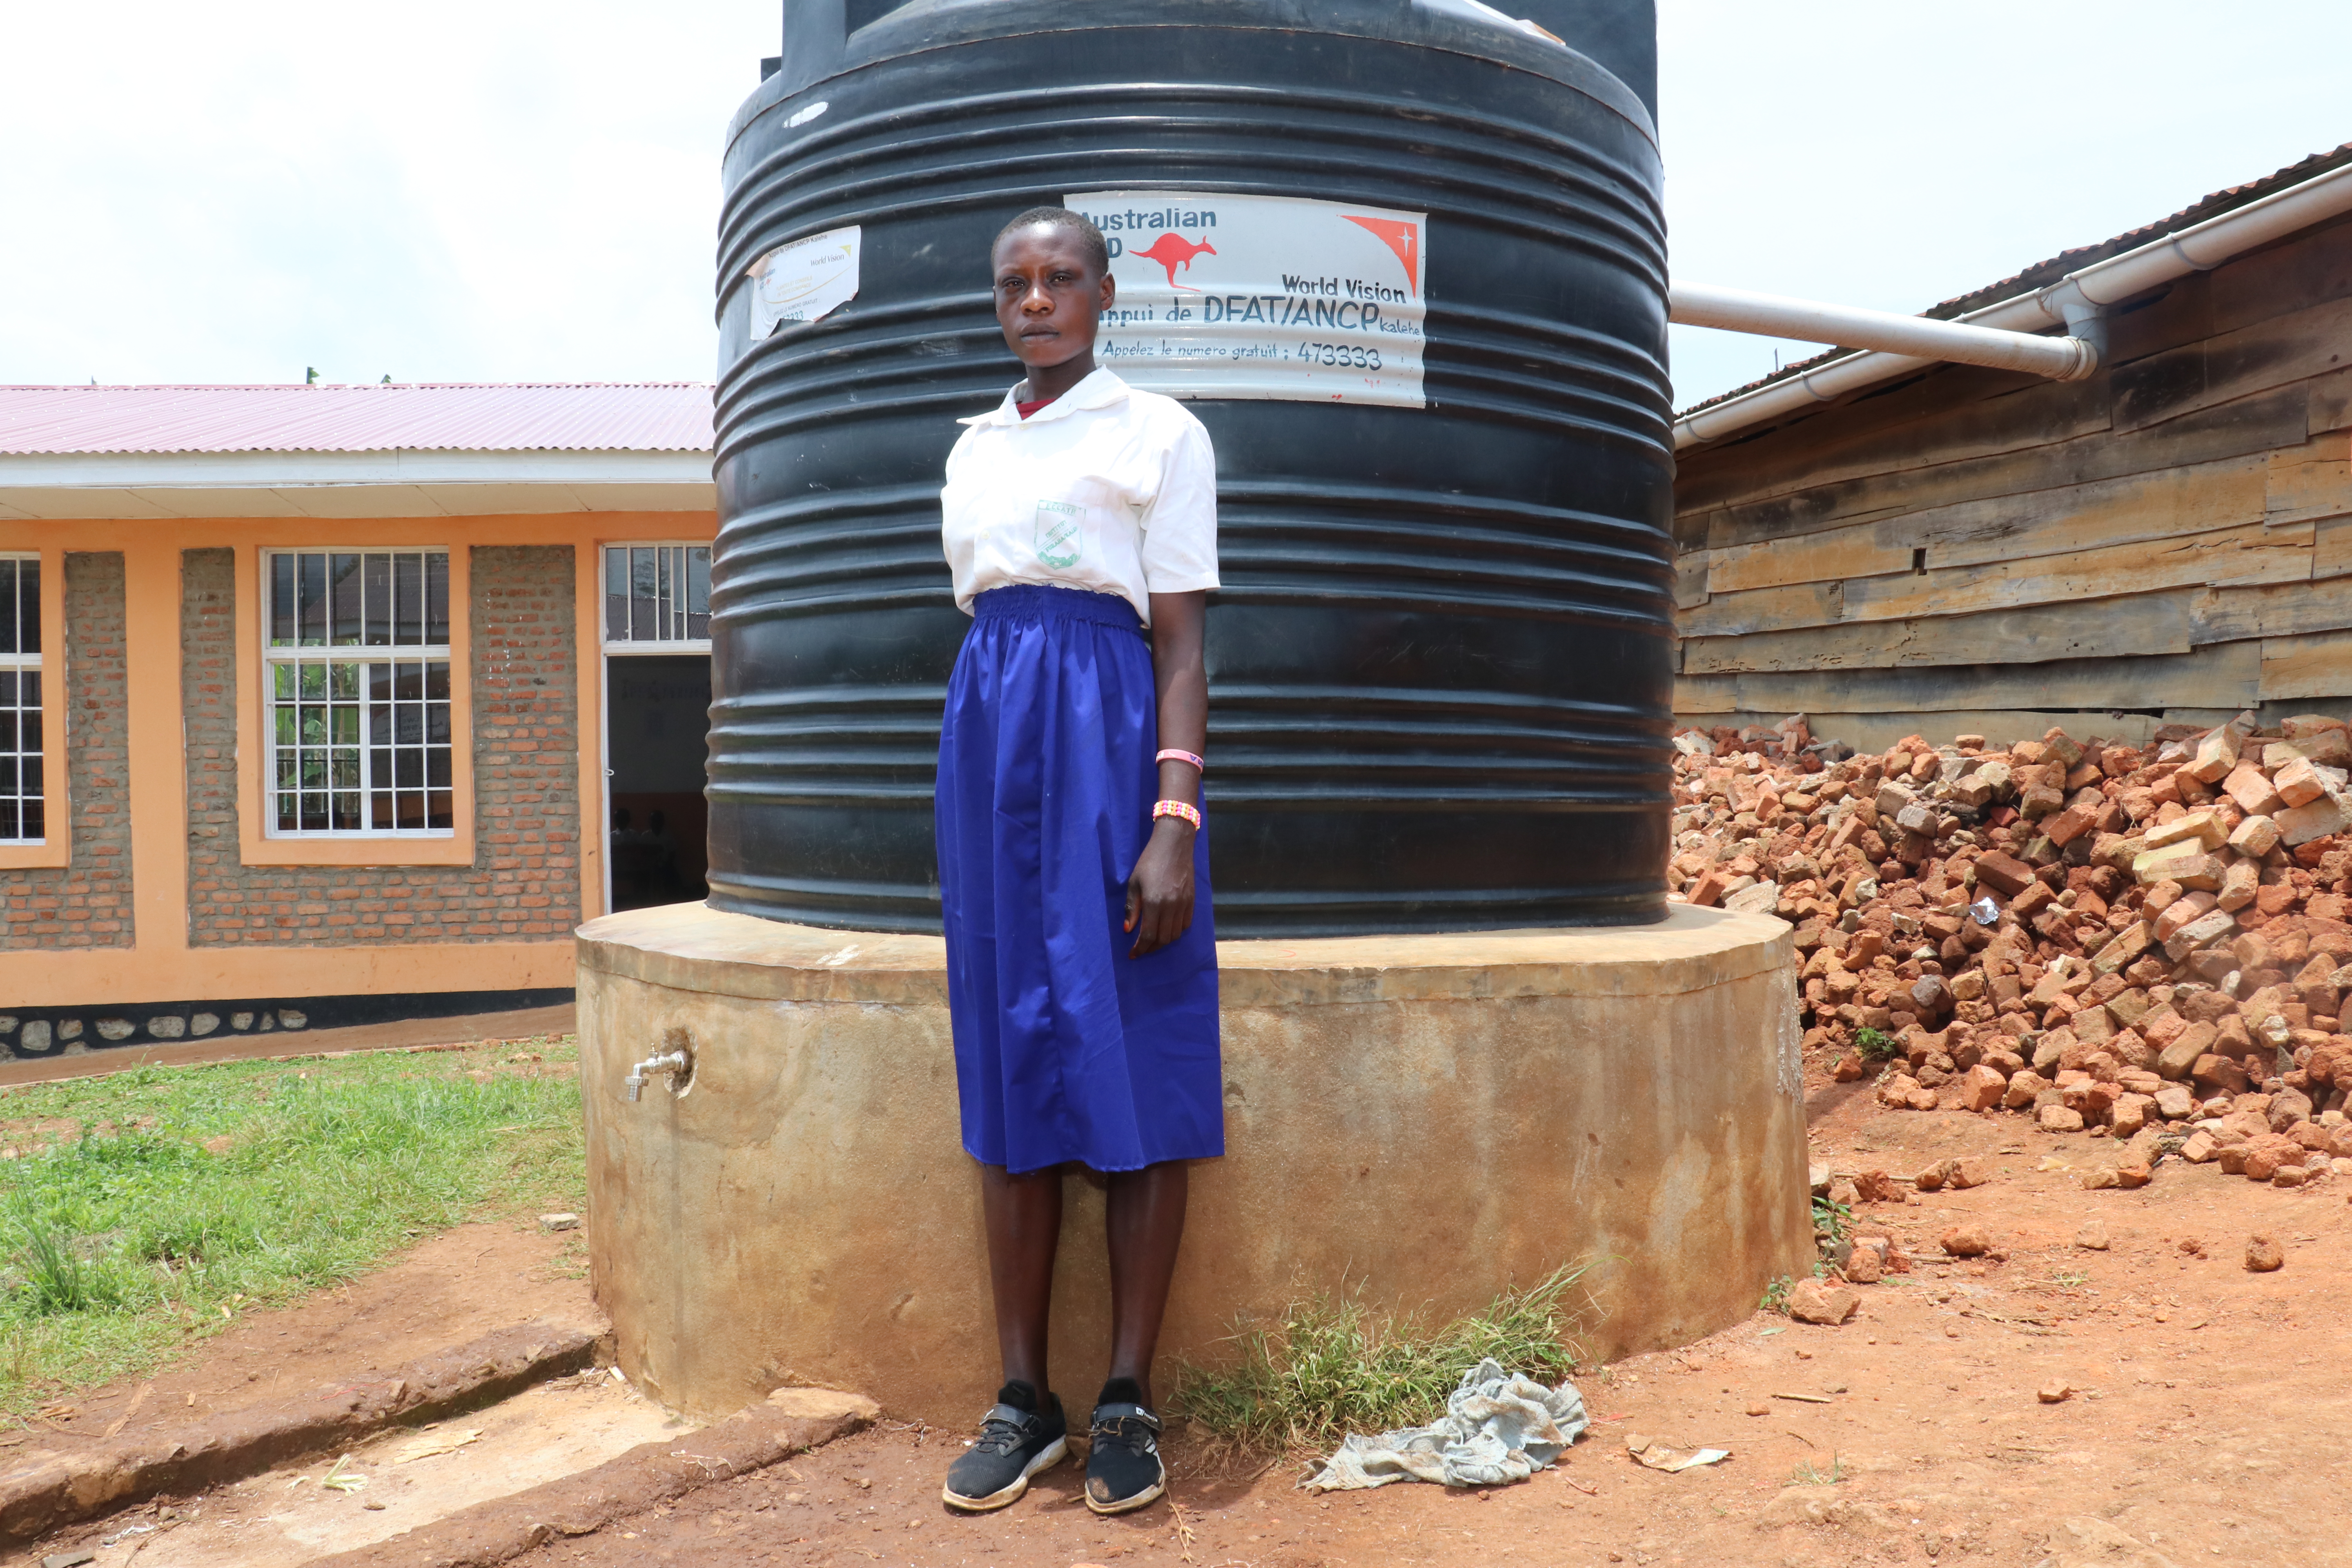 Vanessa in front of a water tank built by World Vision